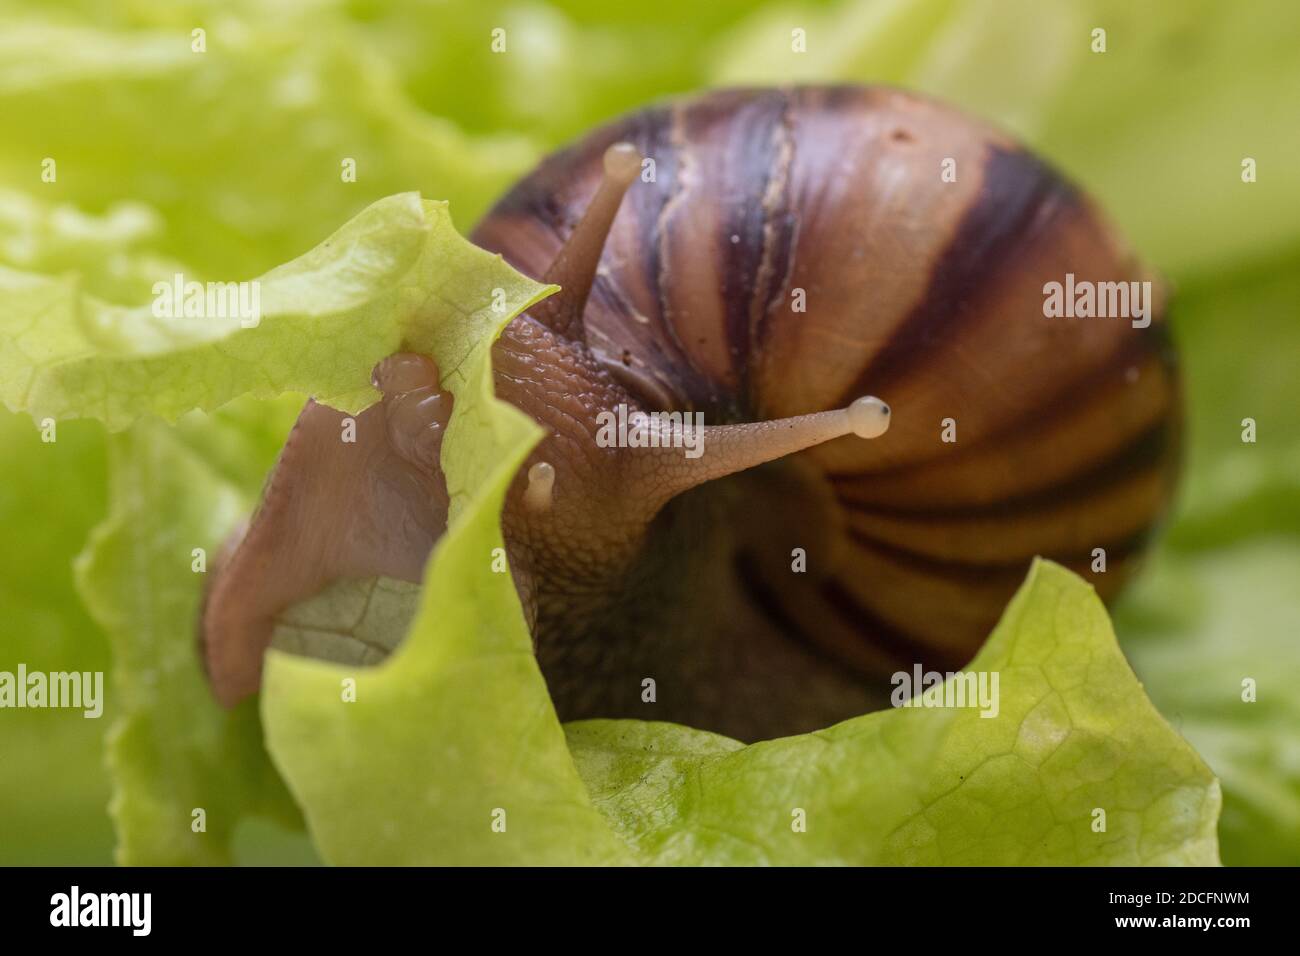 The small Achatina snail eats a leaf of lettuce or grass. Front view of the mouth of a snail chewing grass, selective focus. Can be used to illustrate Stock Photo